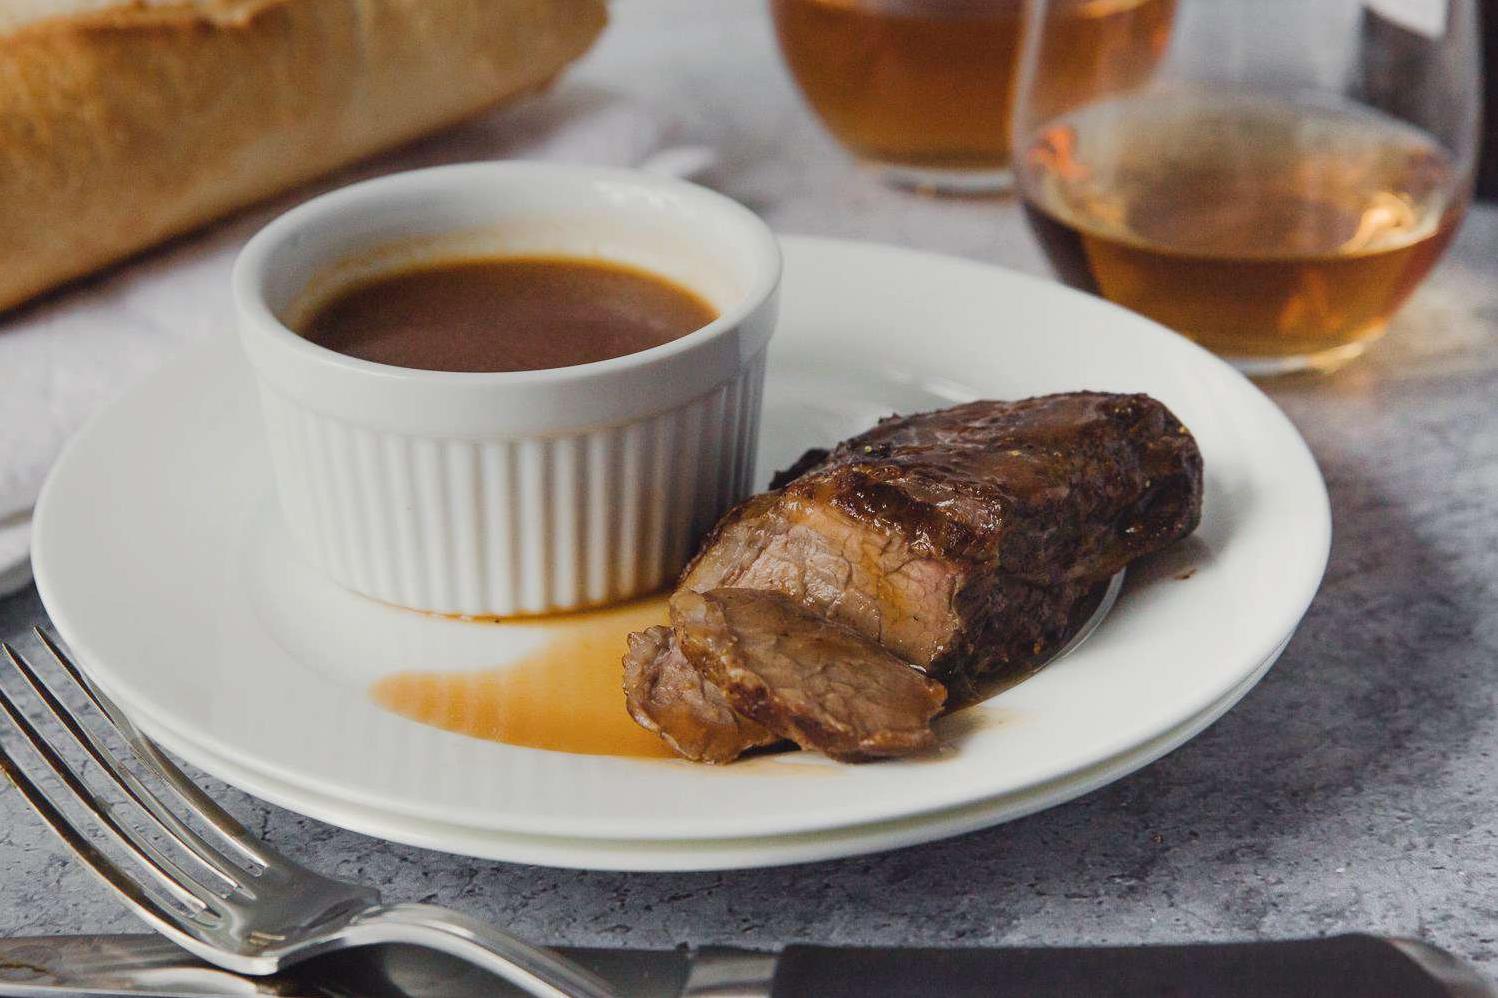  The rich and flavorful sauce complements the beef and elevates the dish to another level